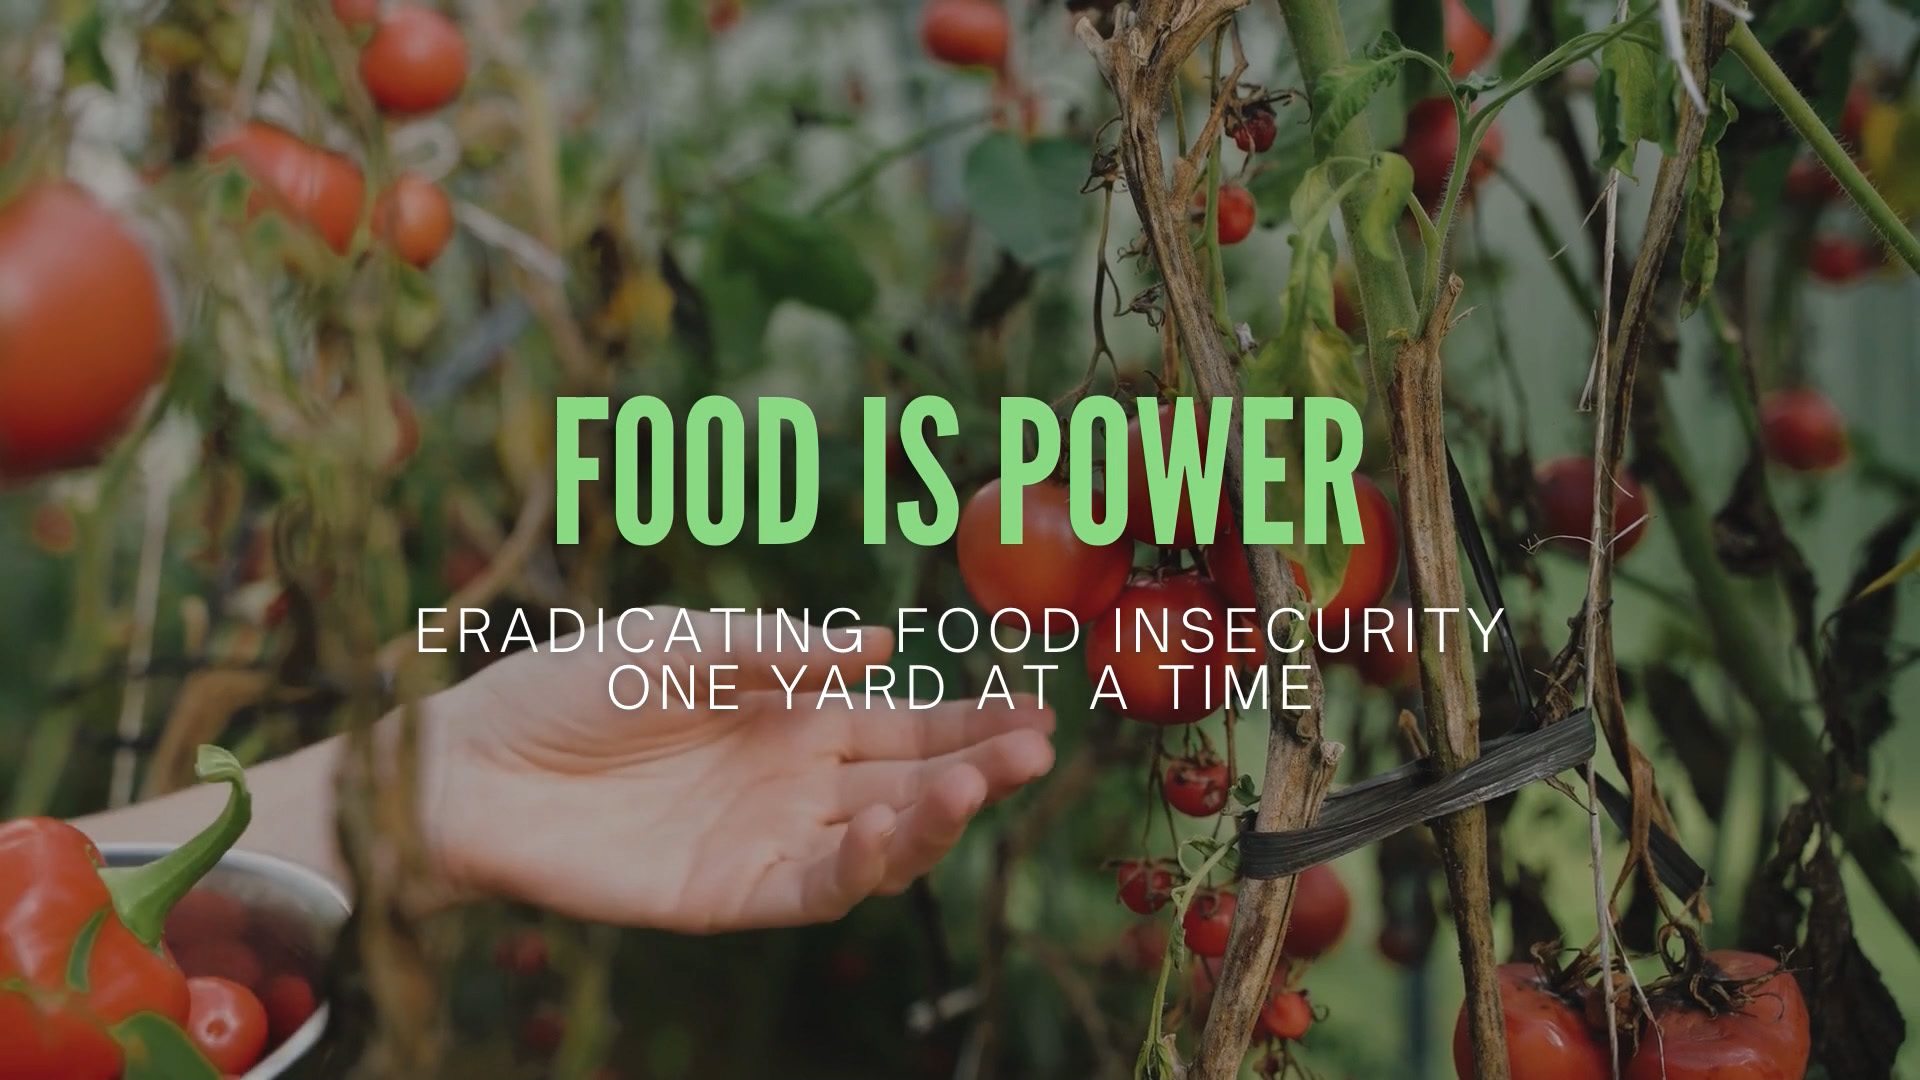 ALL IN Challenge - Help eliminate food insecurity. Enter to Win the All In  Challenge today